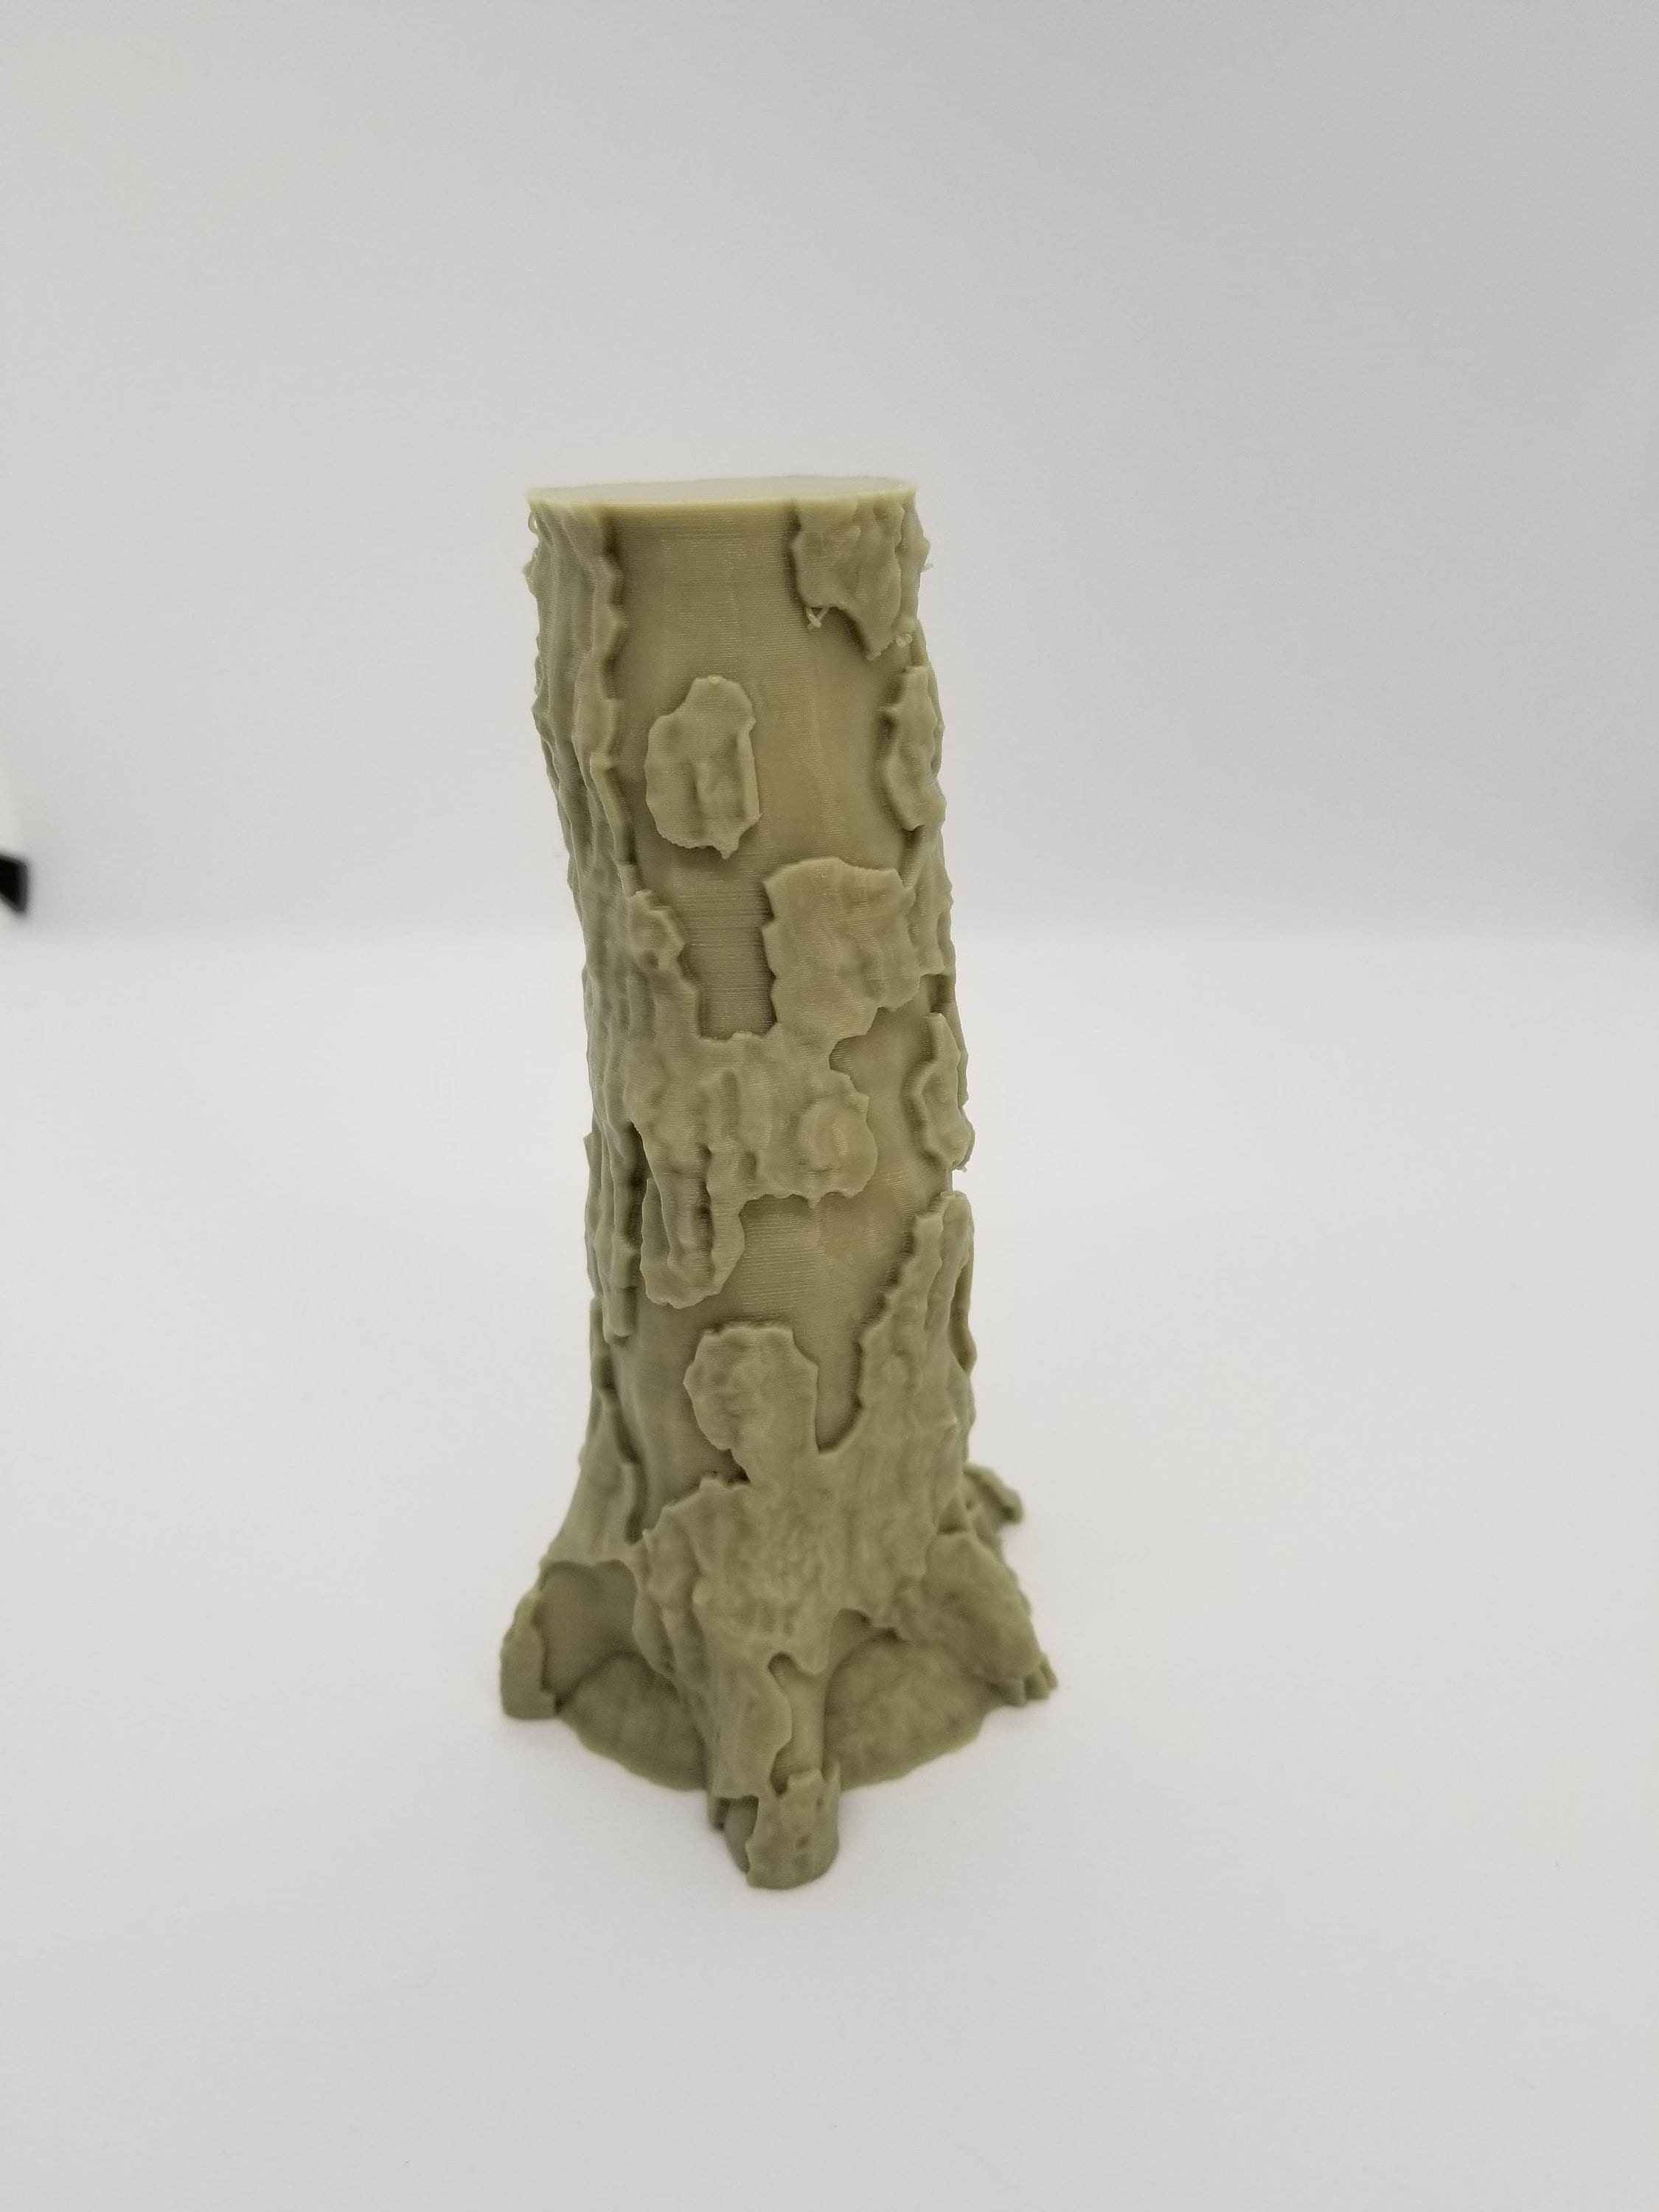 3d Printed 12cm (4.72 in) Tree Pack / SW Legion, Sci-Fi, RPG / Compatible 28mm Tabletop Wargaming Terrain / Print to Order